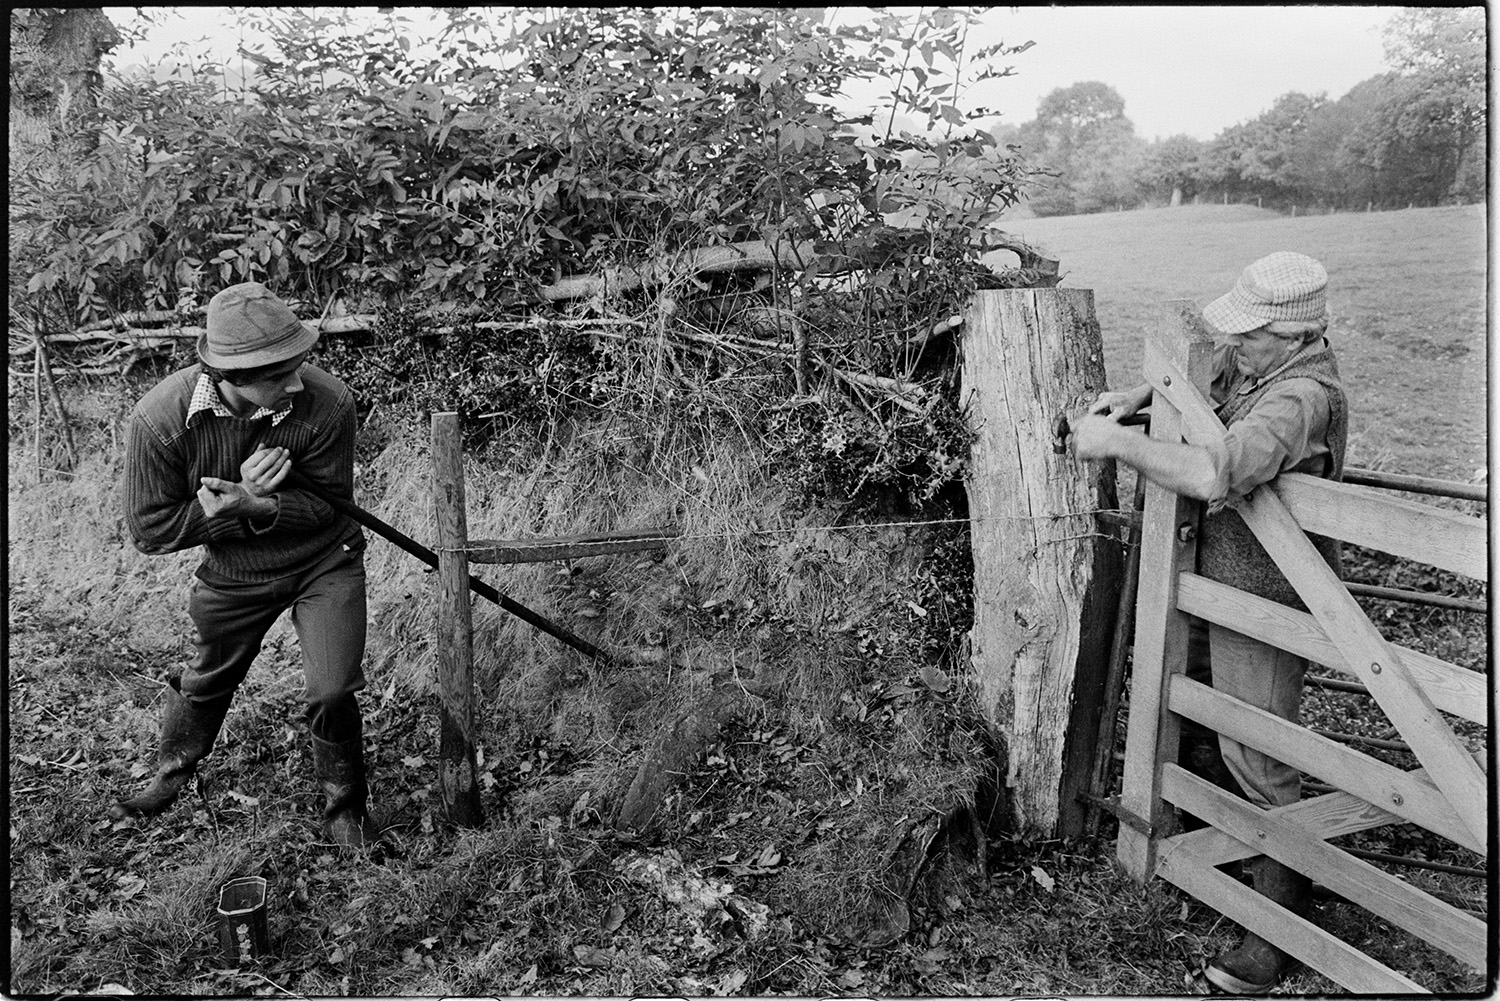 Farmers mending fencing. 
[Alf Pugsley and Stephen Squire mending the fence by a field gateway at Lower Langham, Dolton. Alf Pugsley is leaning over the field gate.]